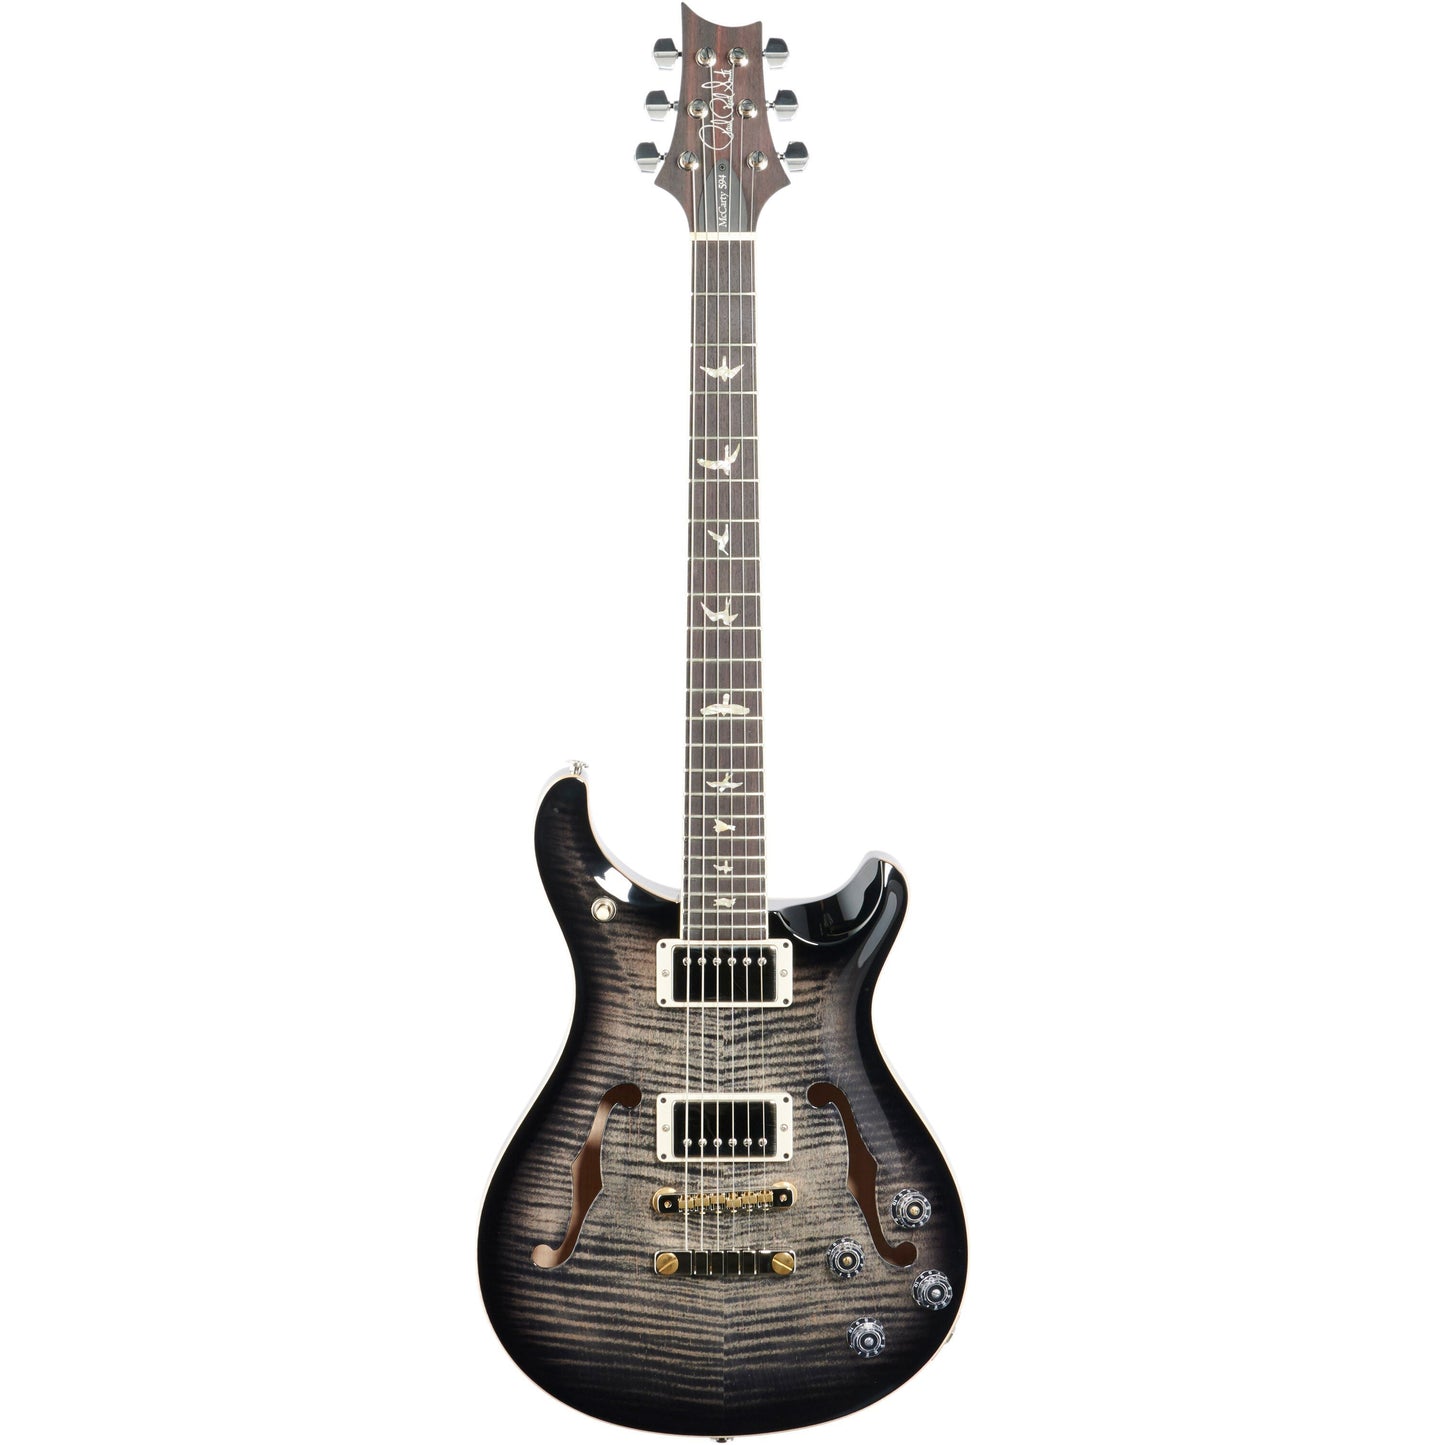 PRS Paul Reed Smith McCarty 594 Hollowbody II 10 Top Electric Guitar (with Case), Charcoal Burst